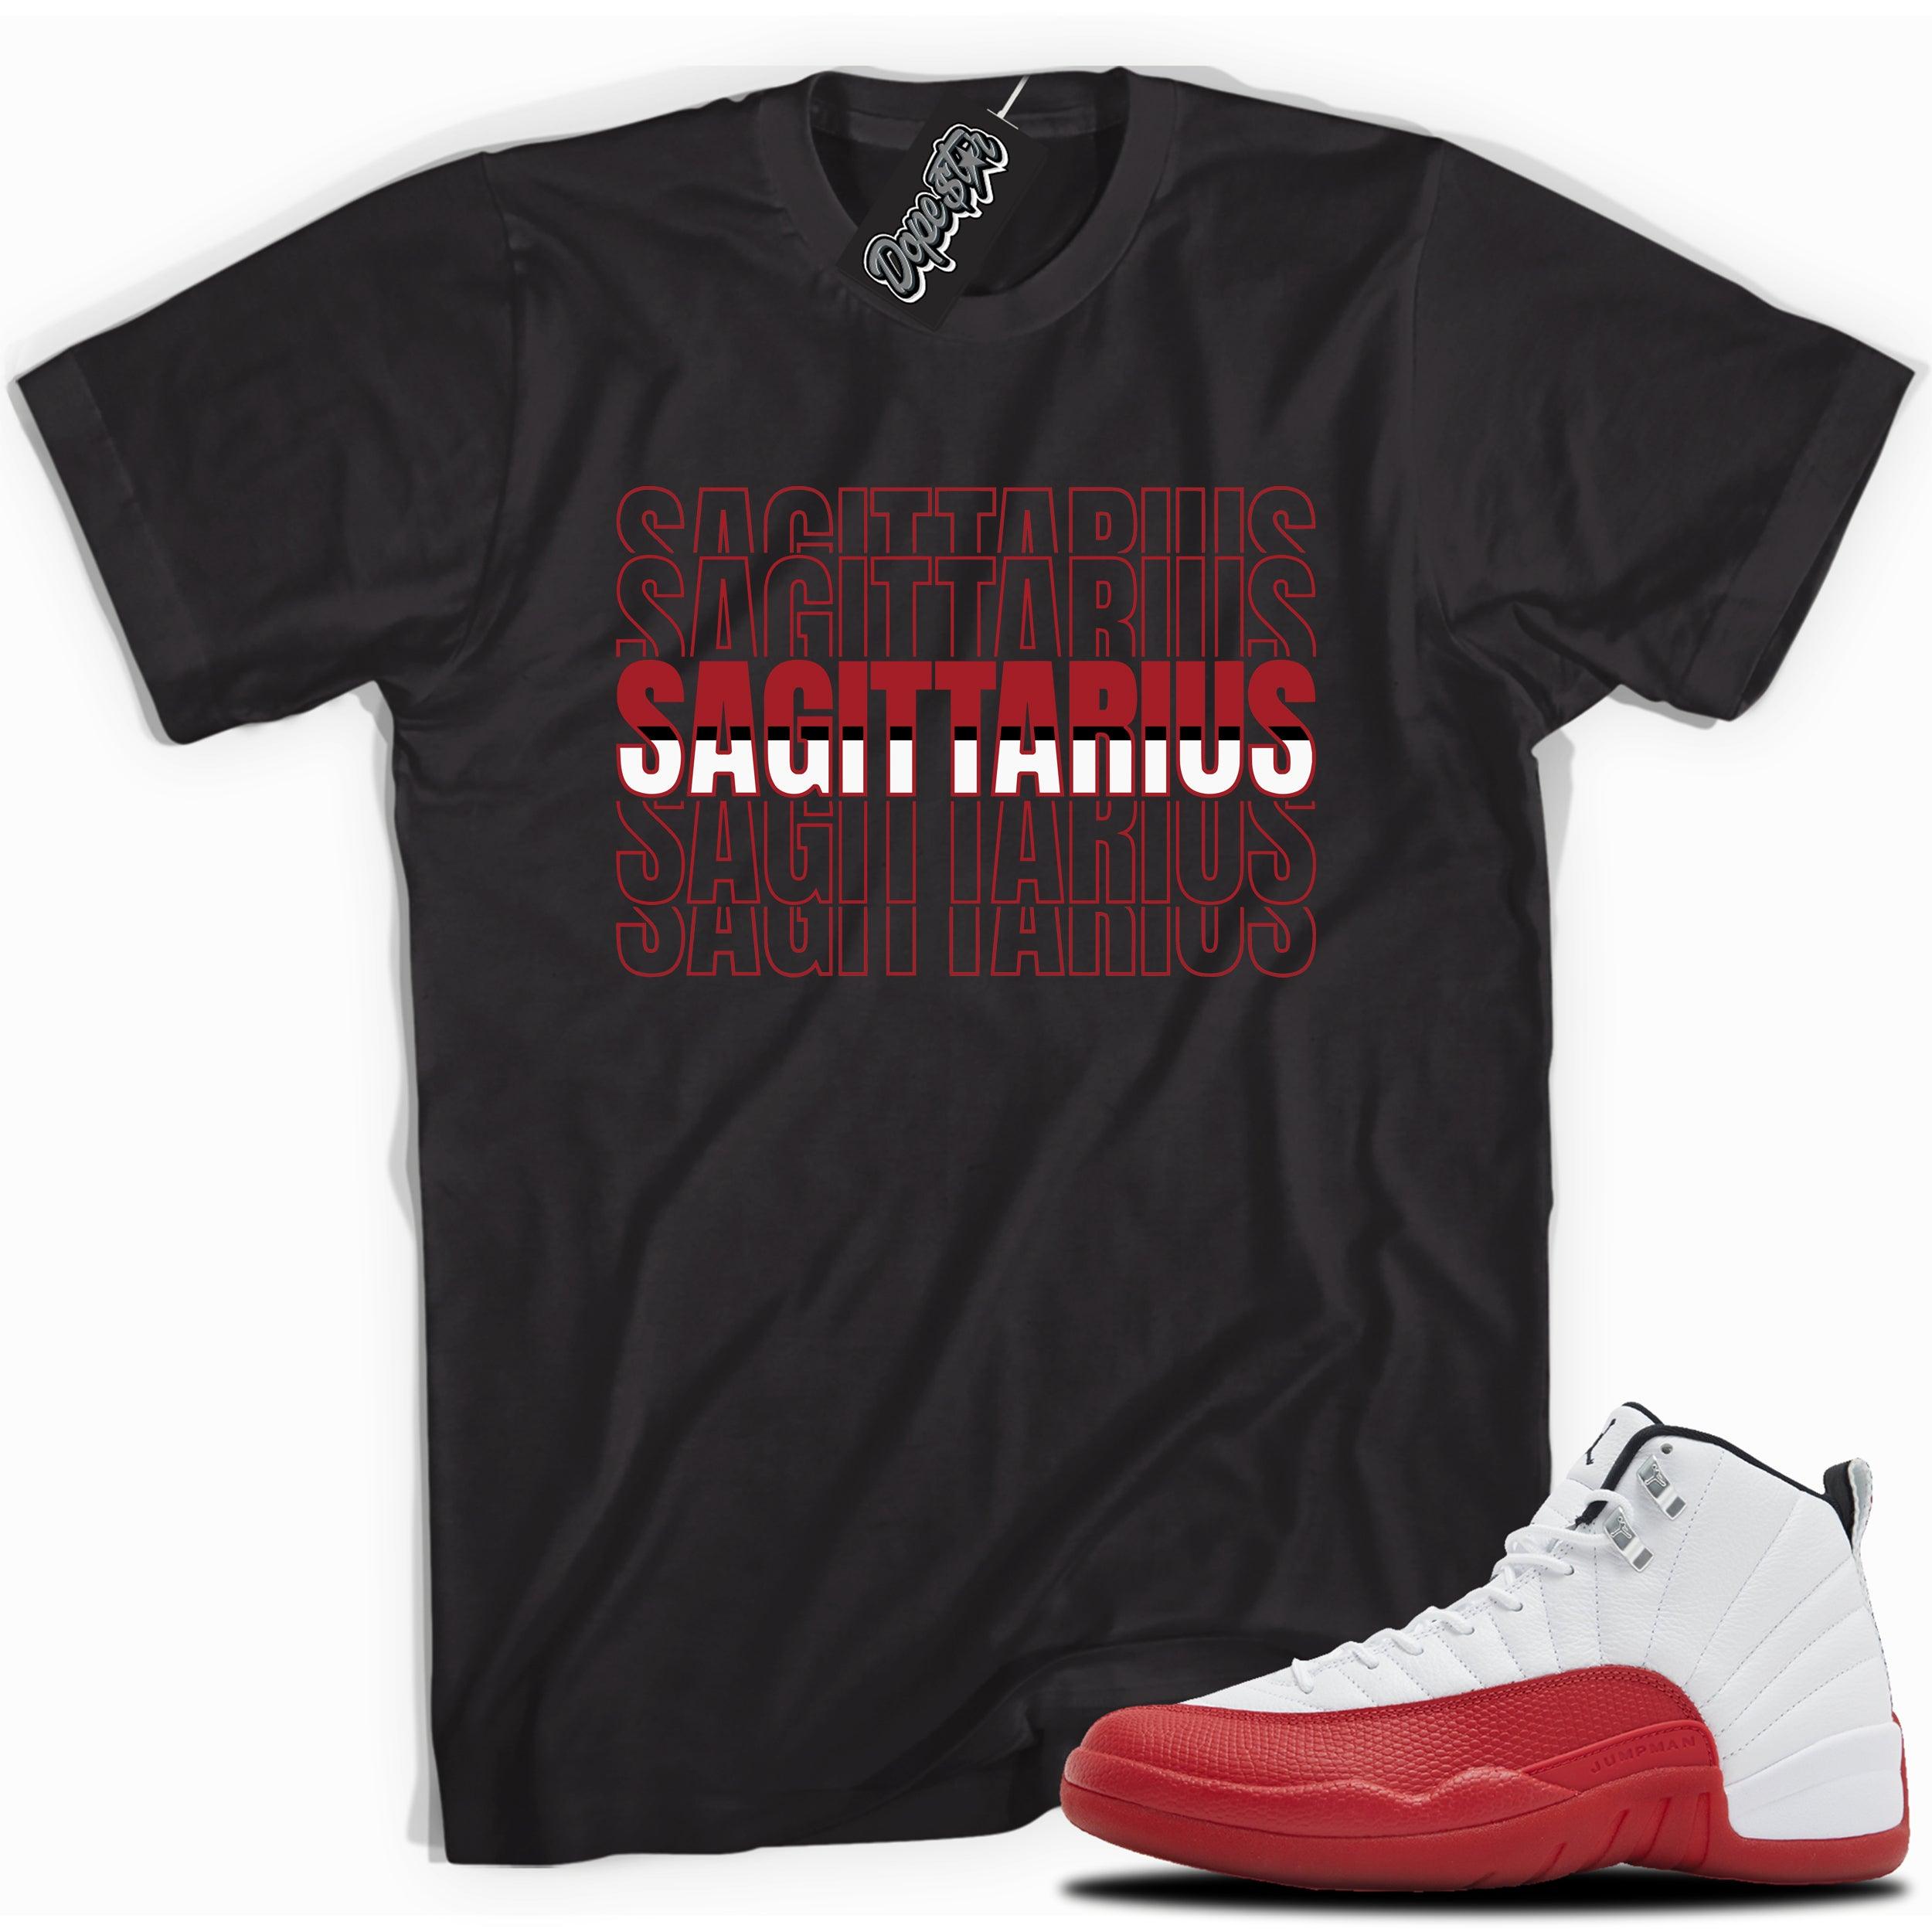 Cool Black graphic tee with “Sagittarius” print, that perfectly matches Air Jordan 12 Retro Cherry Red 2023 red and white sneakers